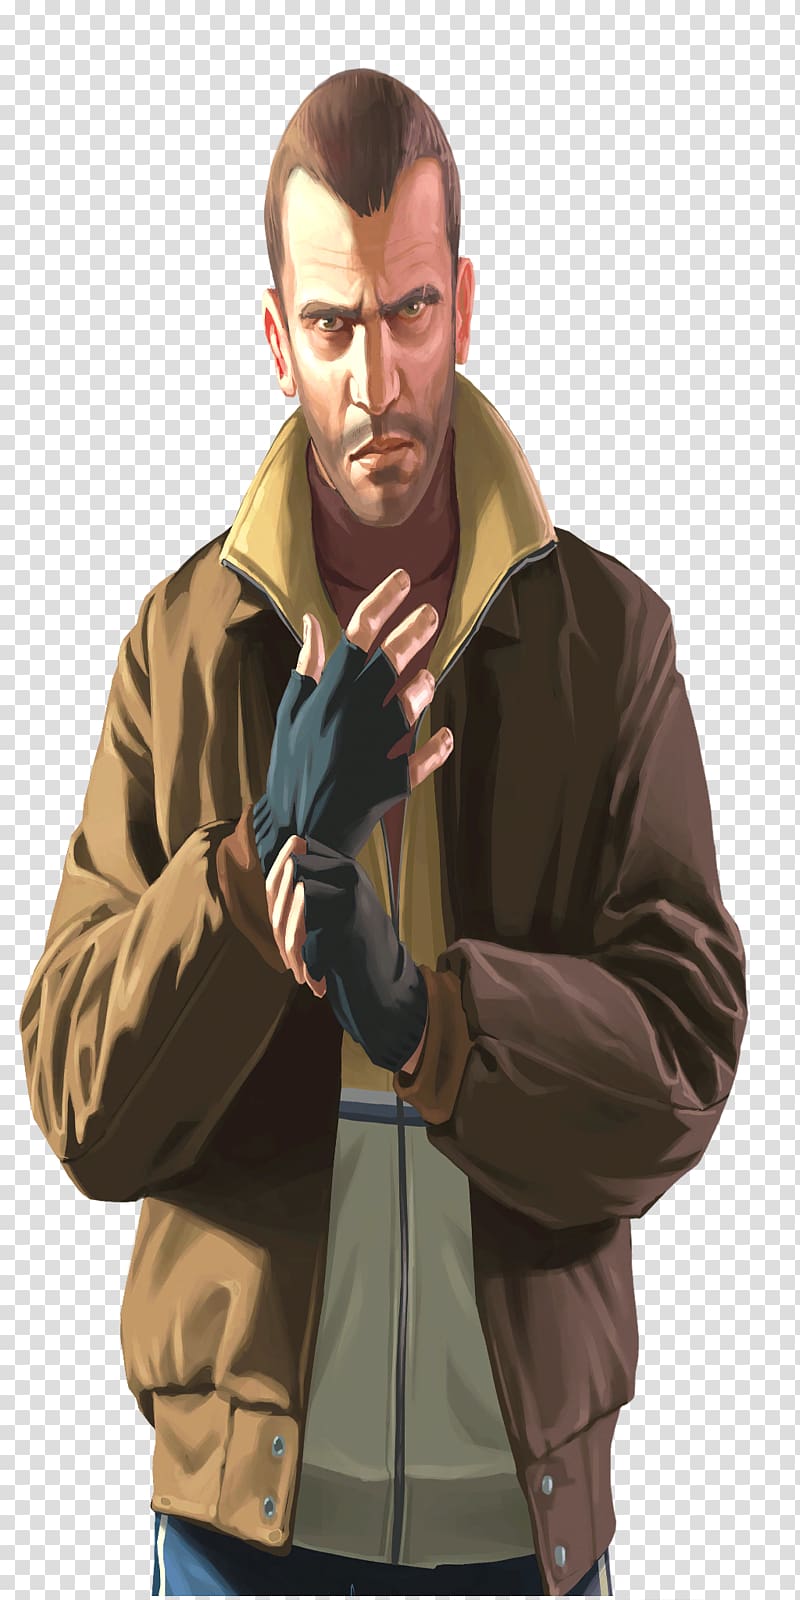 Grand Theft Auto: San Andreas Grand Theft Auto V Niko Bellic Grand Theft Auto: Episodes from Liberty City Grand Theft Auto III, vice transparent background PNG clipart